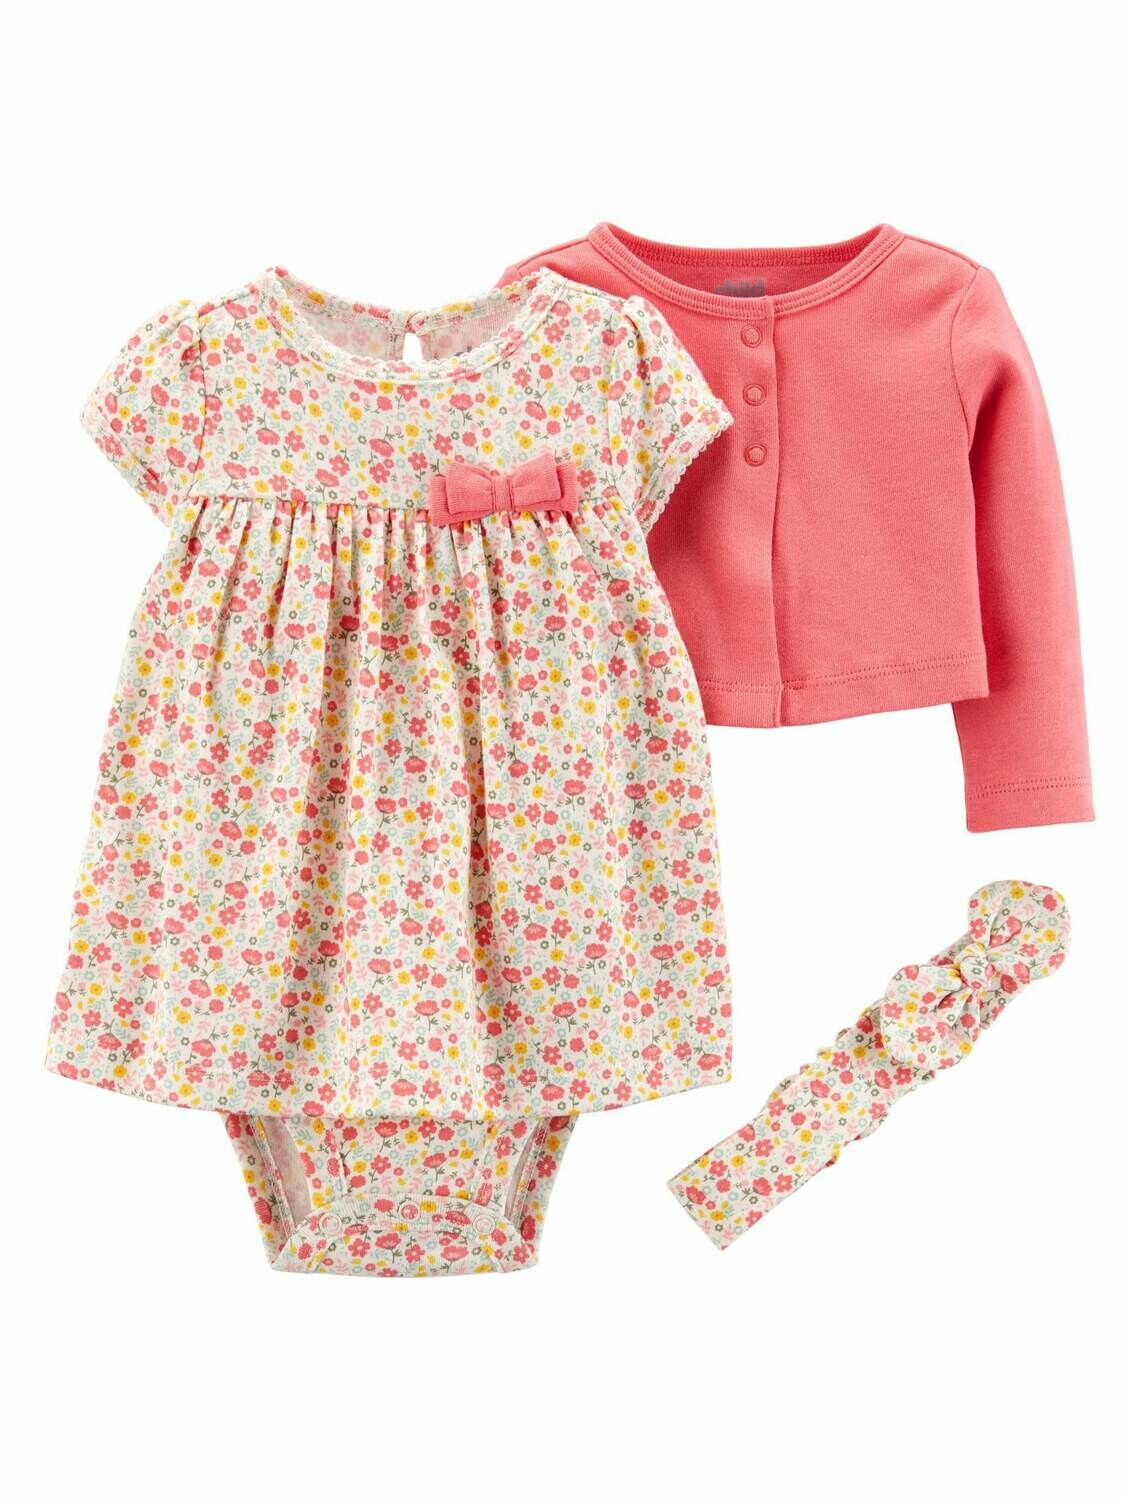 Child Of Mines by Carters Baby Girl  Onesie+Cardigan 3PC Set